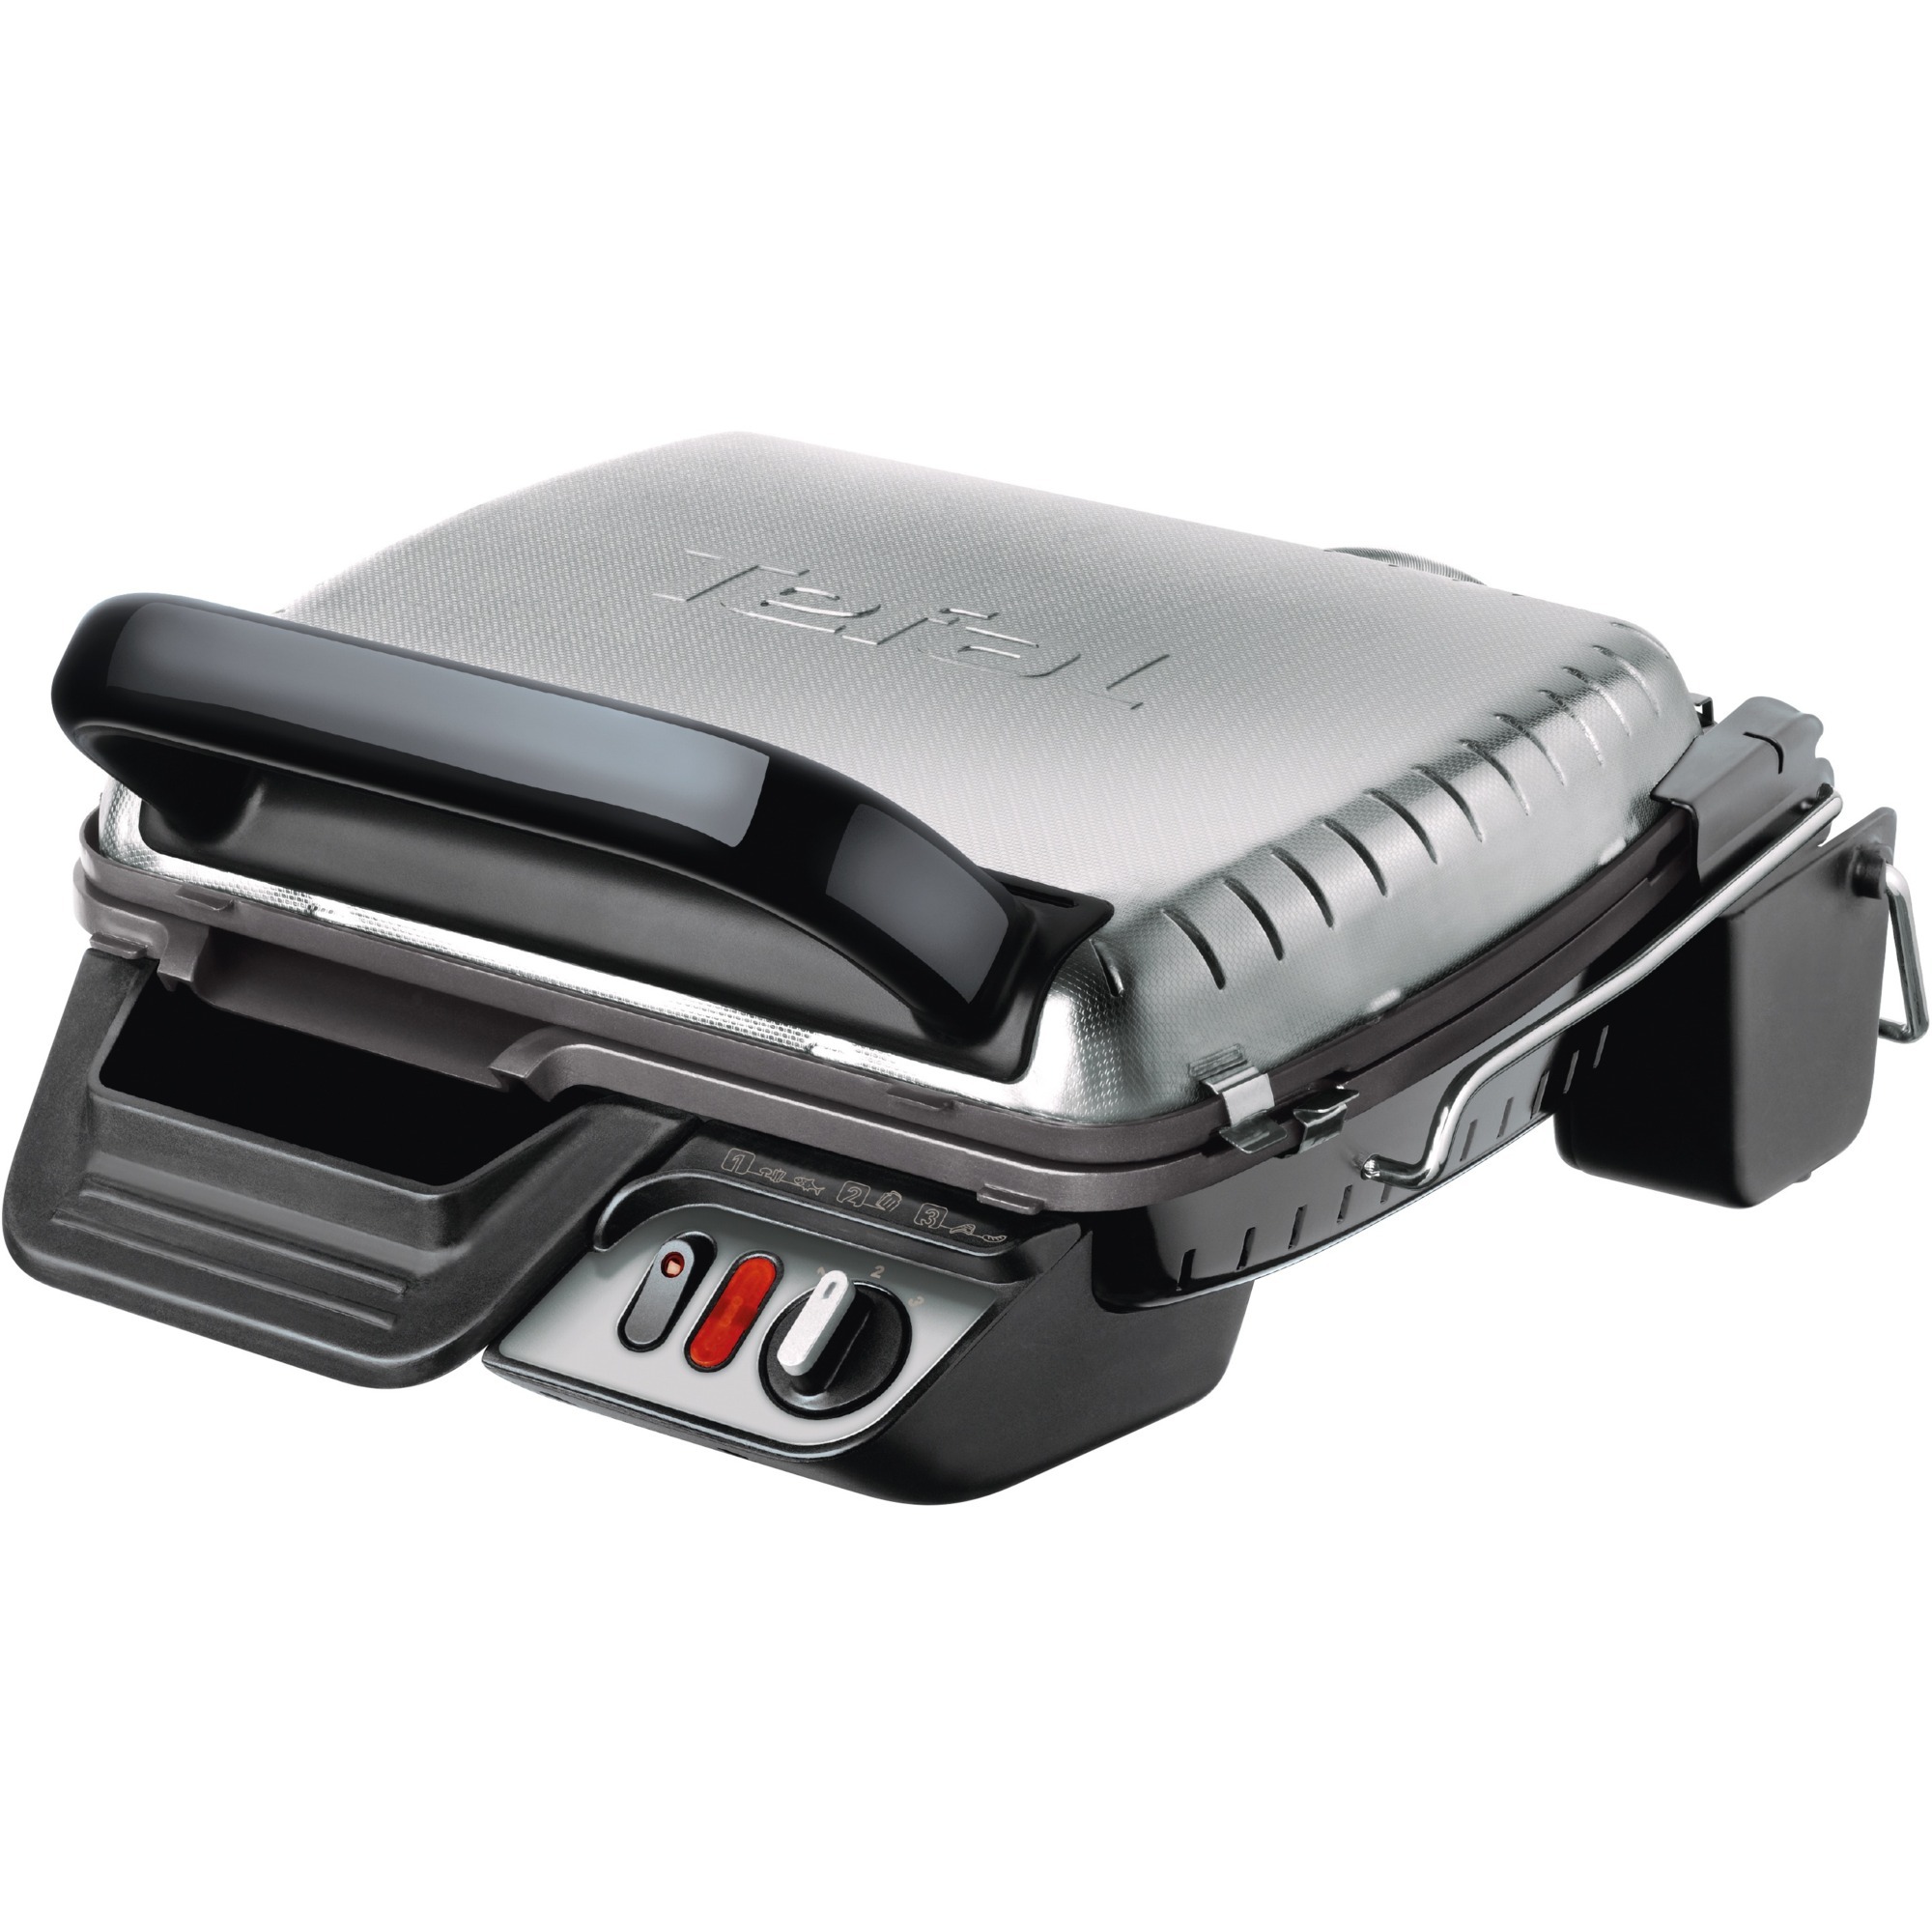 Ultra Compact 600 Comfort GC3060, Grill